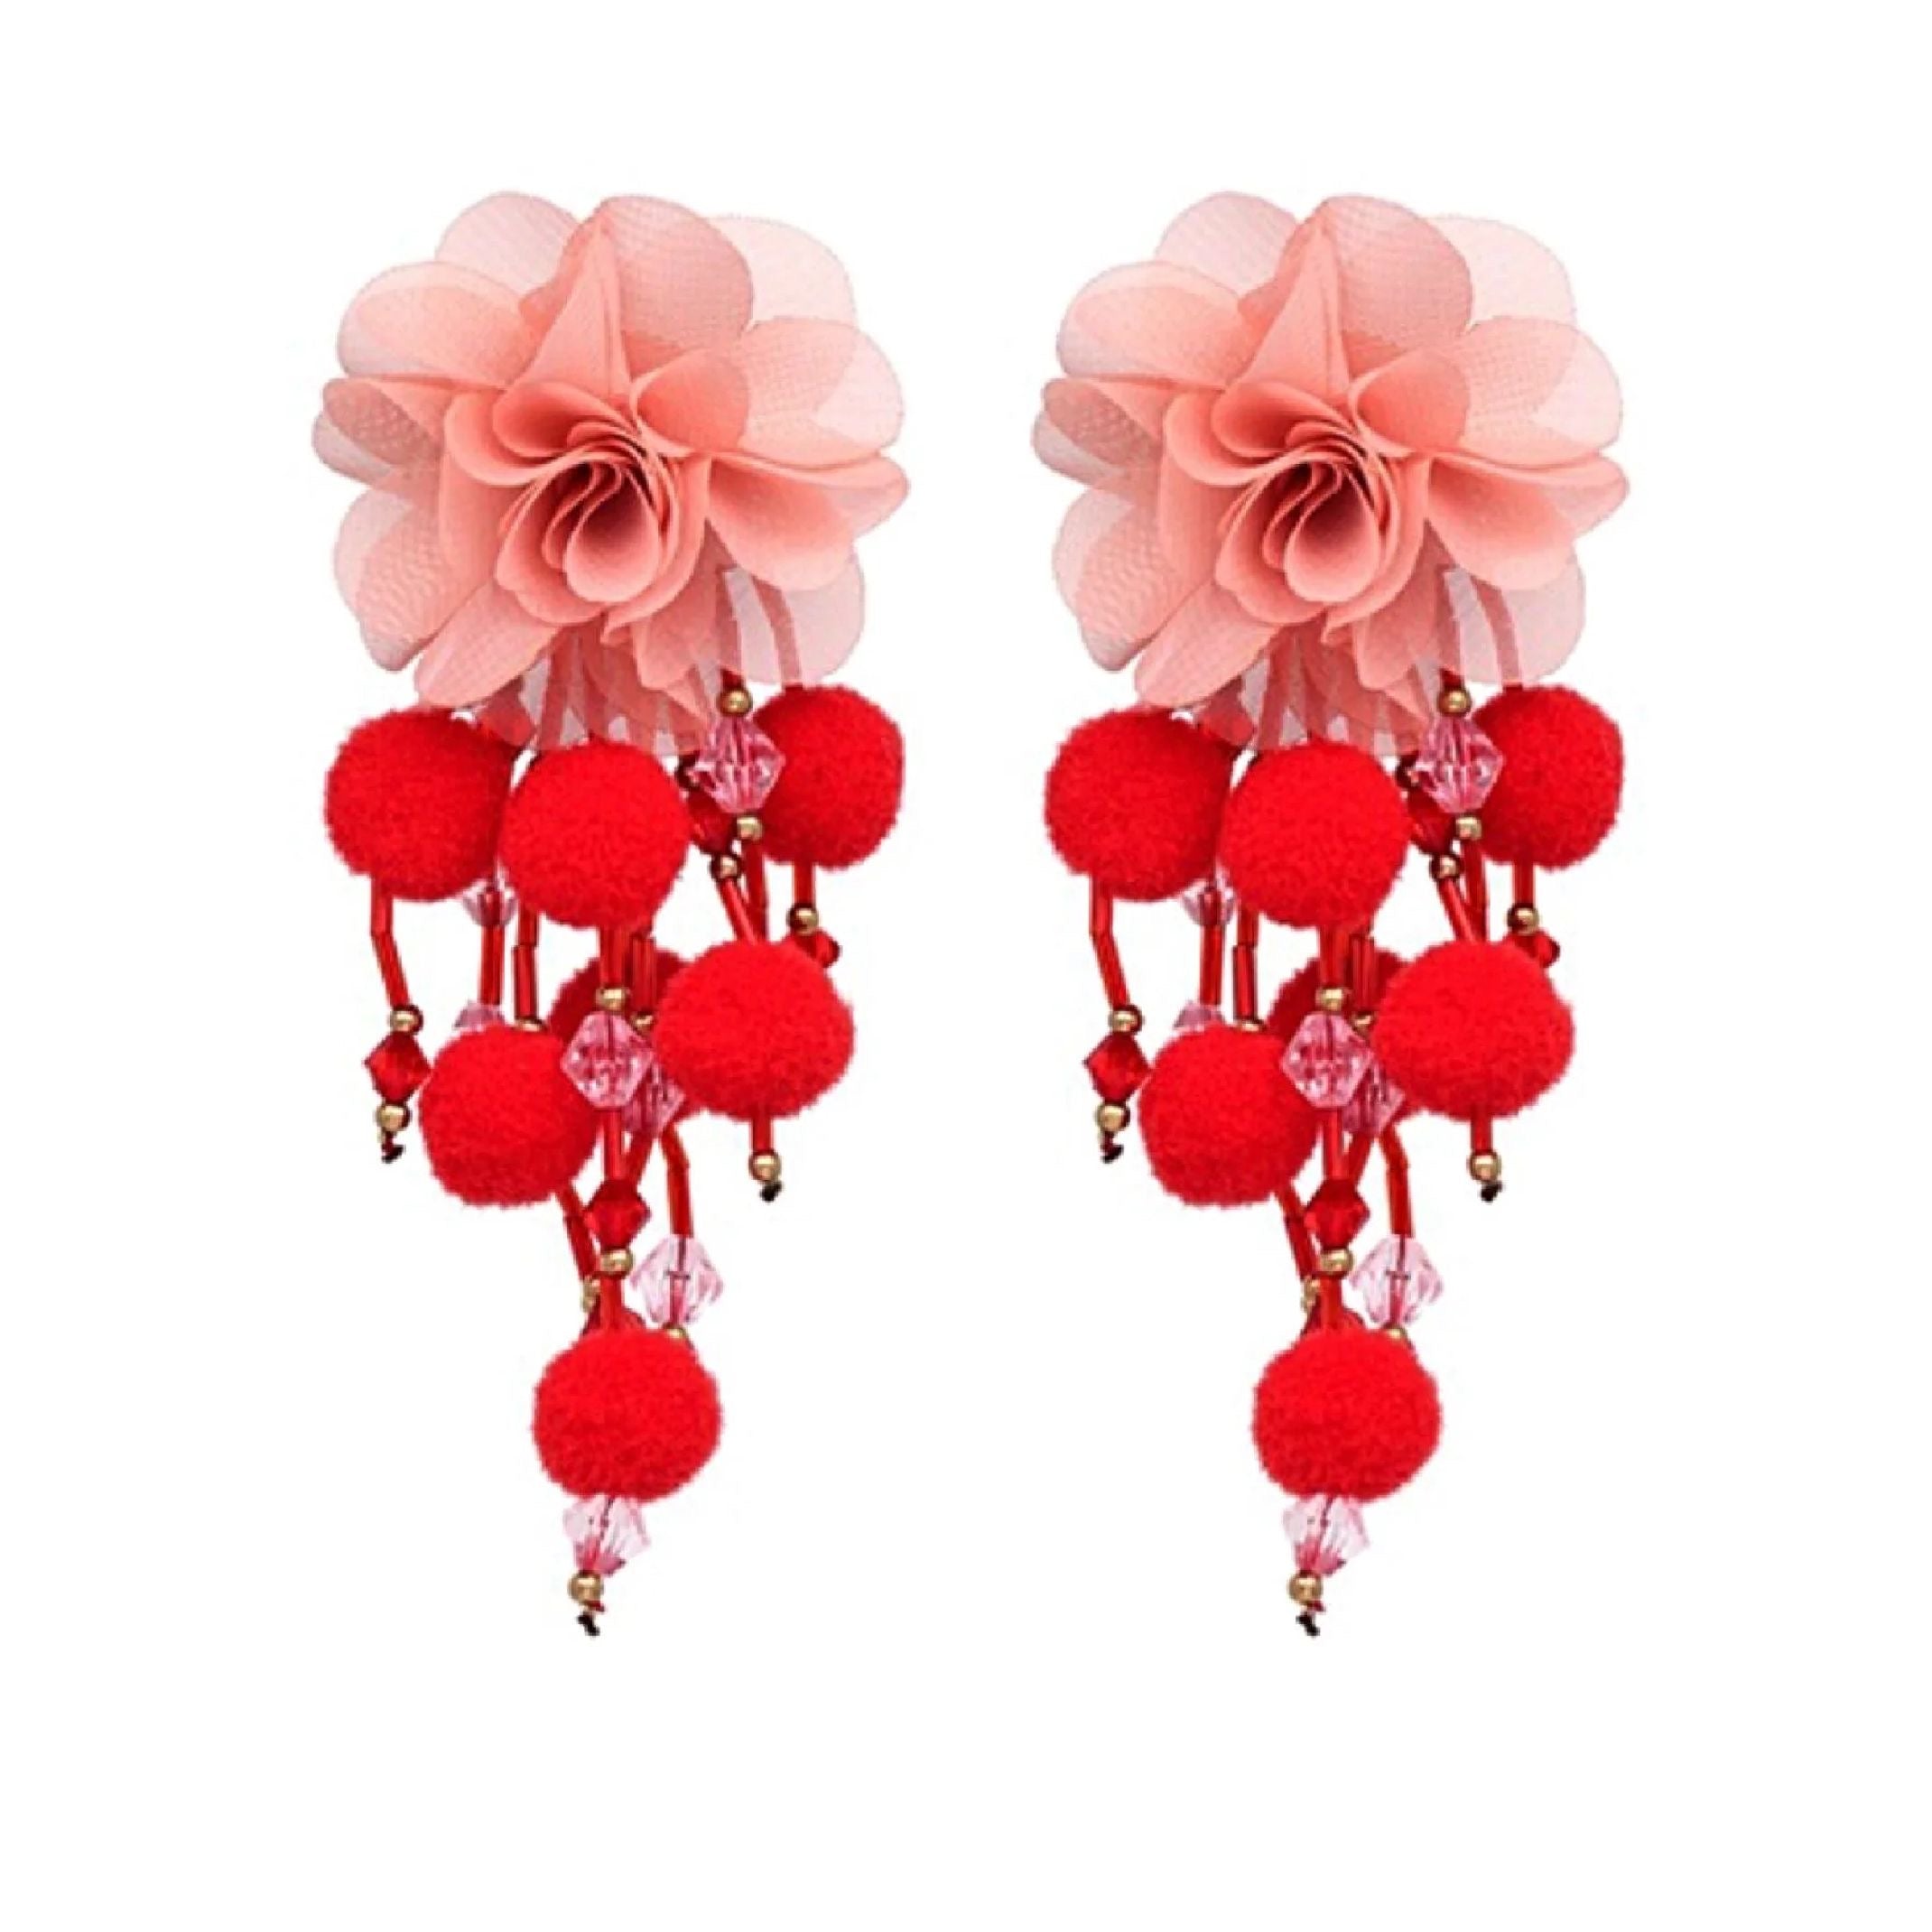 Red and pink flower earrings 